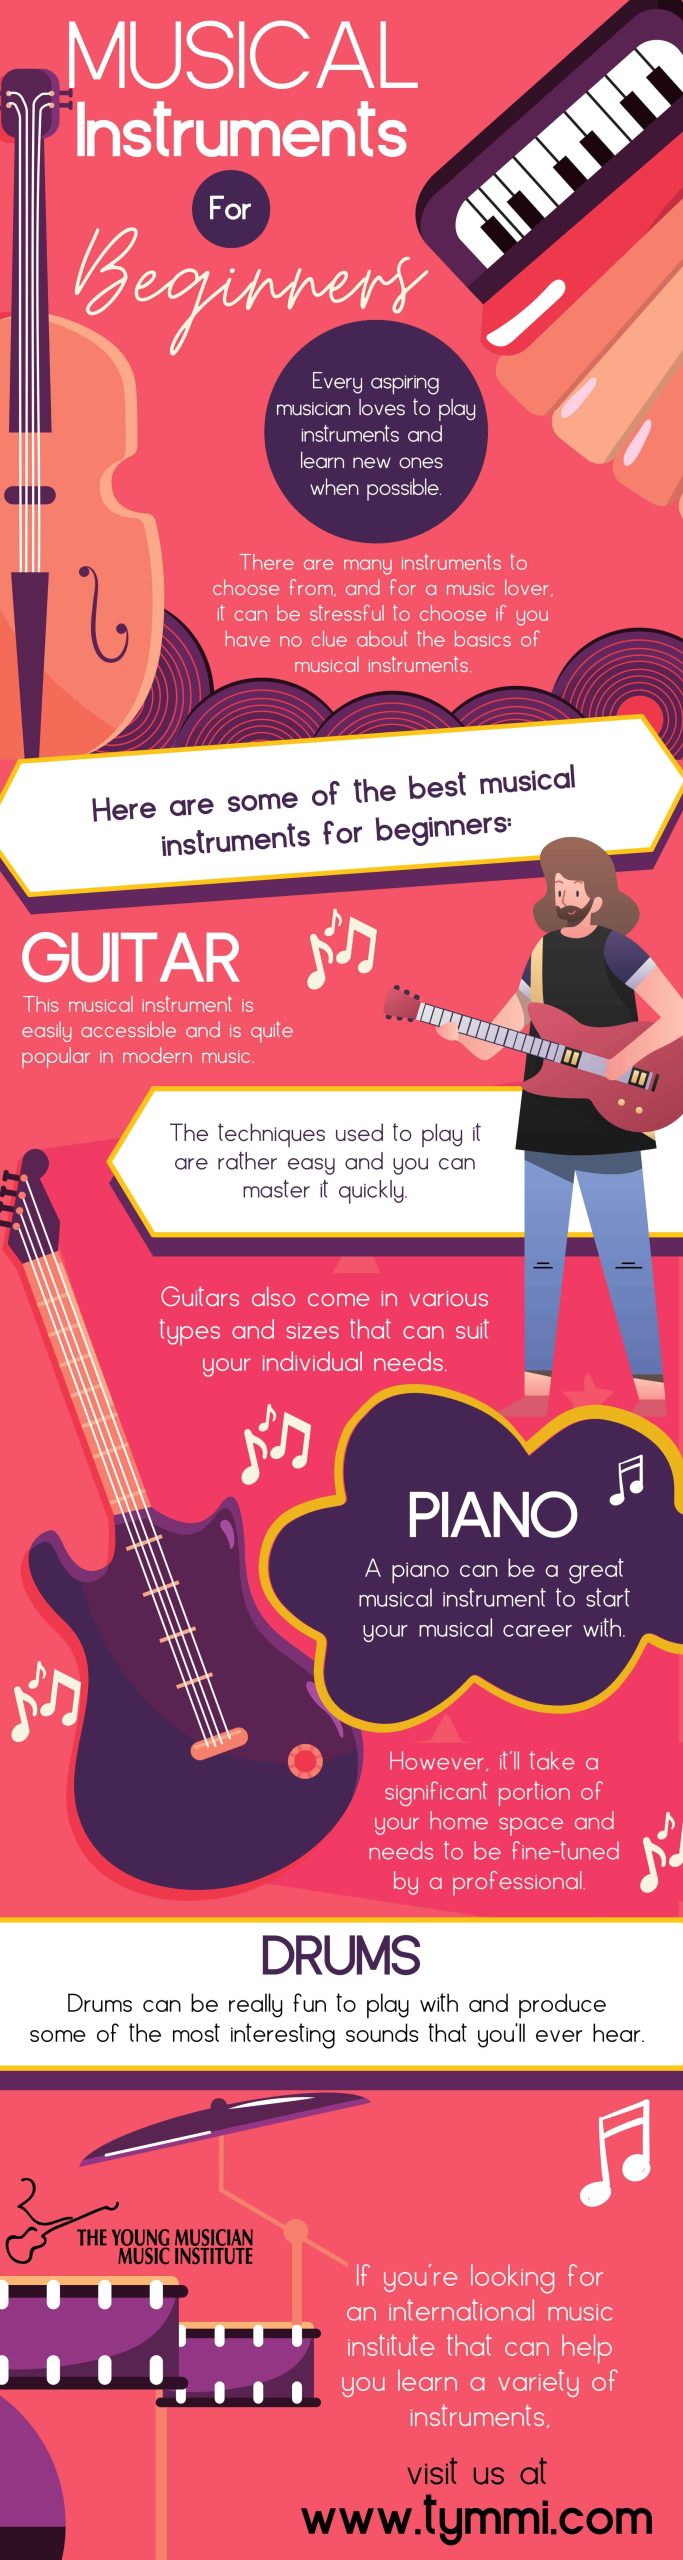 Musical Instruments For Beginners